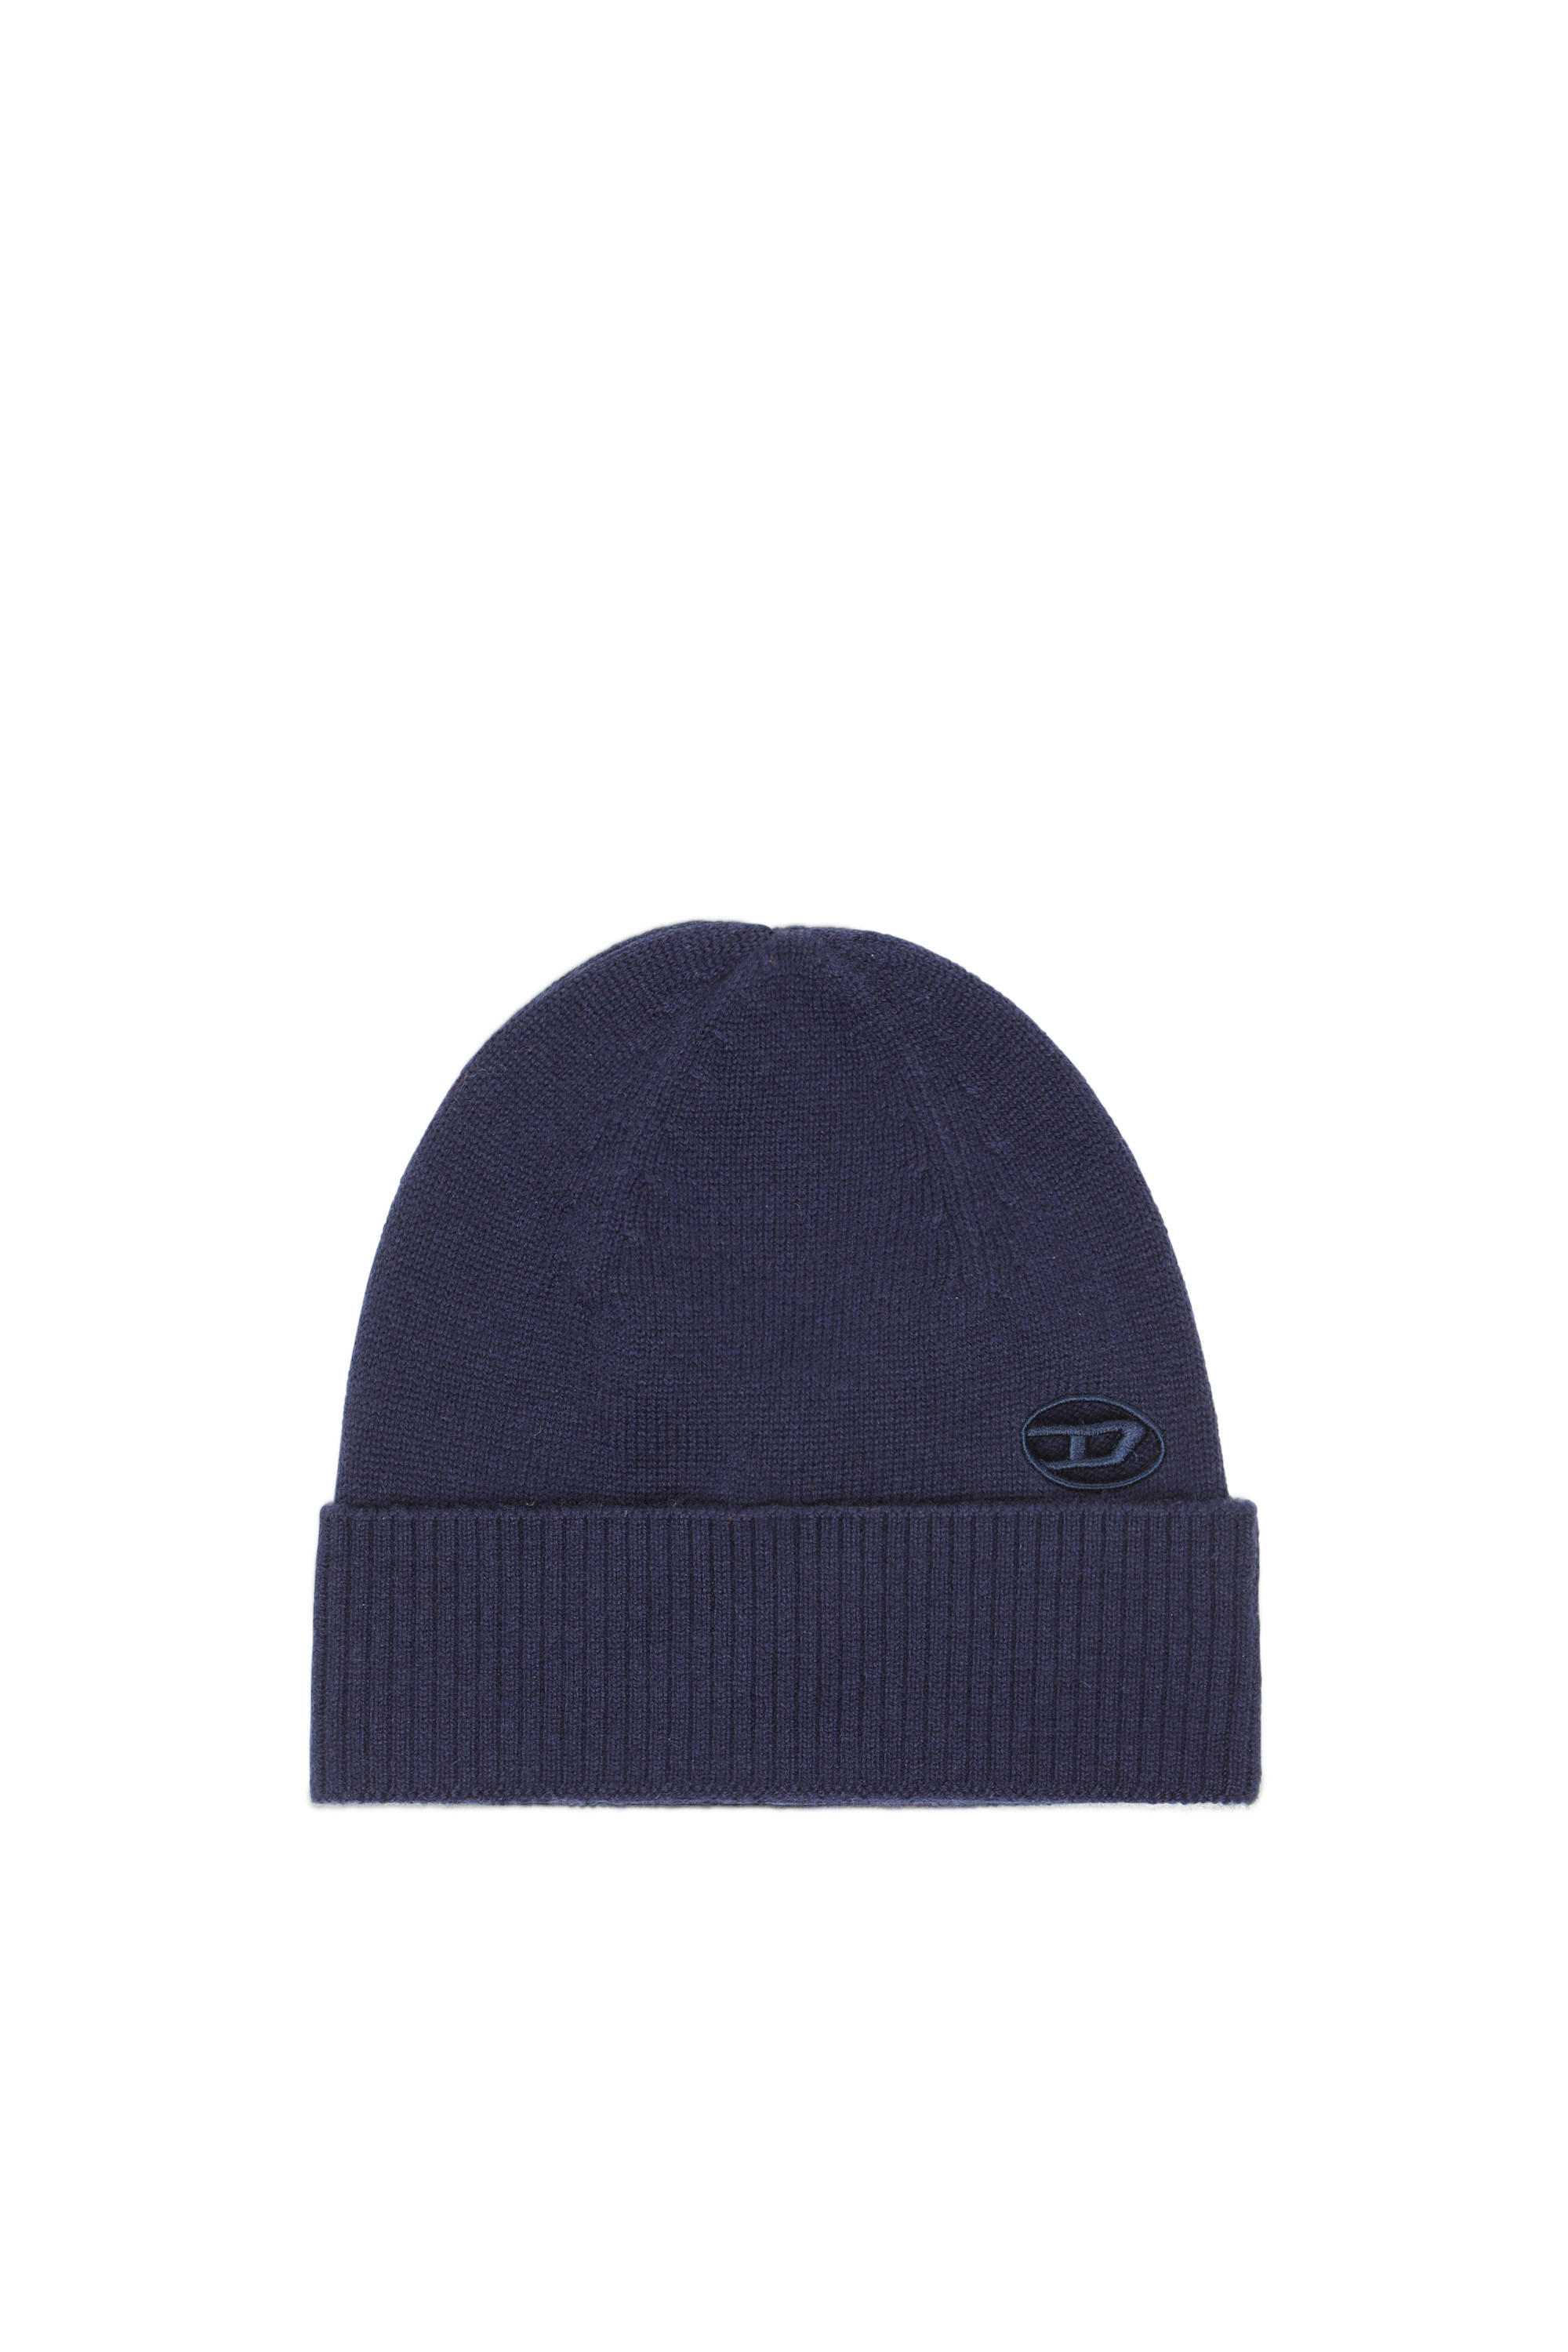 Diesel Beanie With Embroidered Oval D Patch In Blue